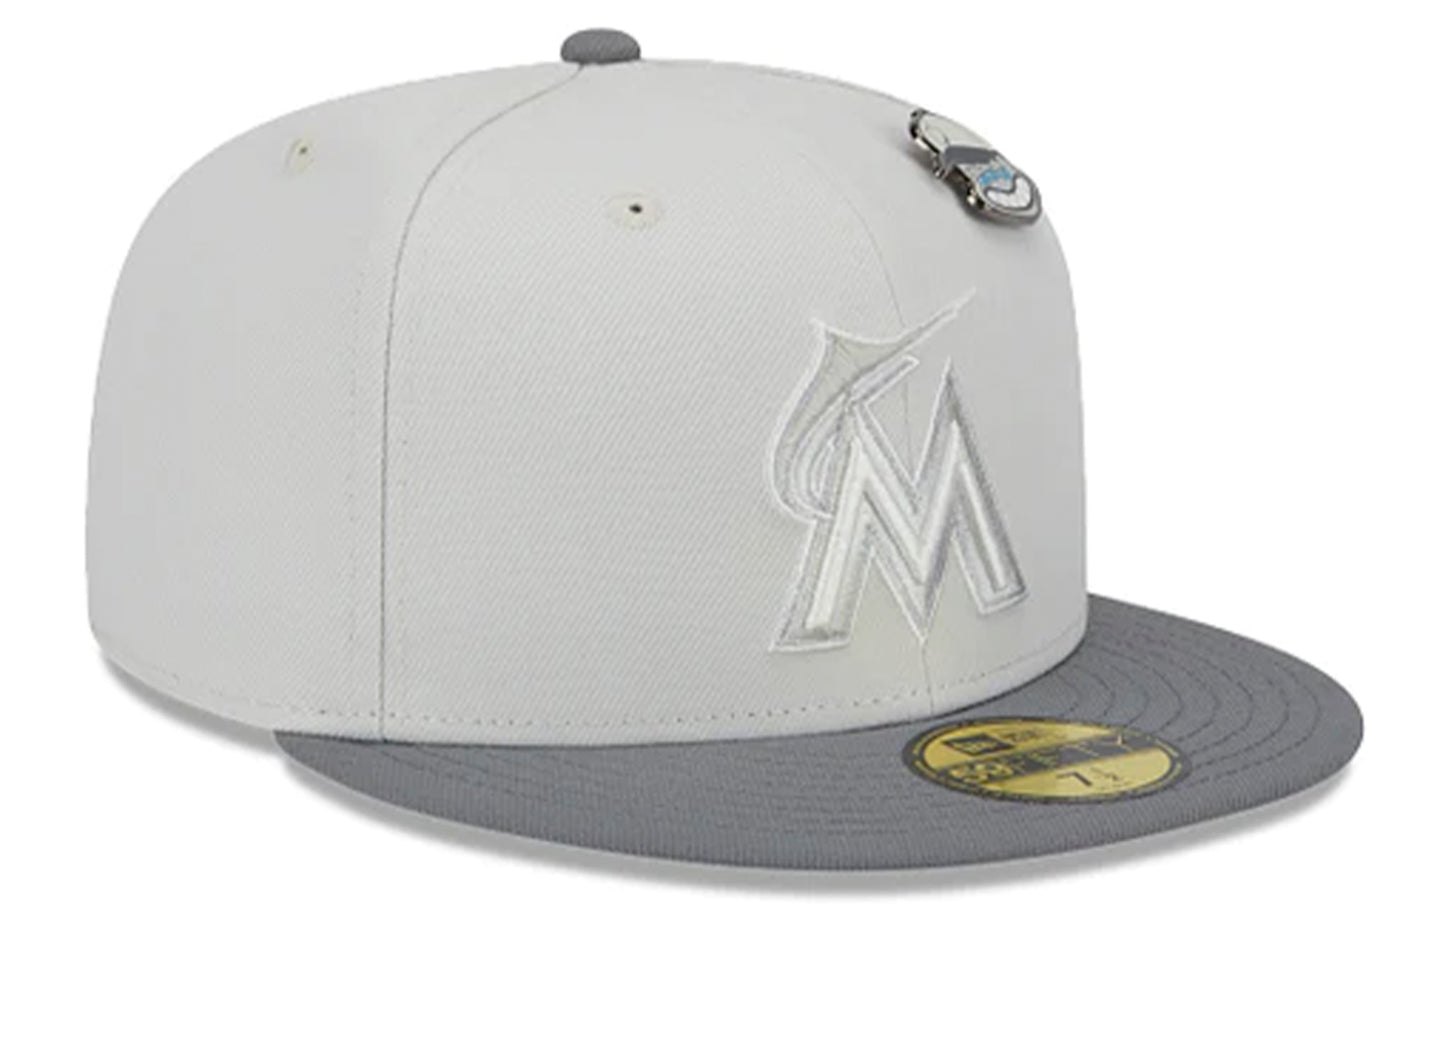 New Era Outer Space Miami Marlins Hat